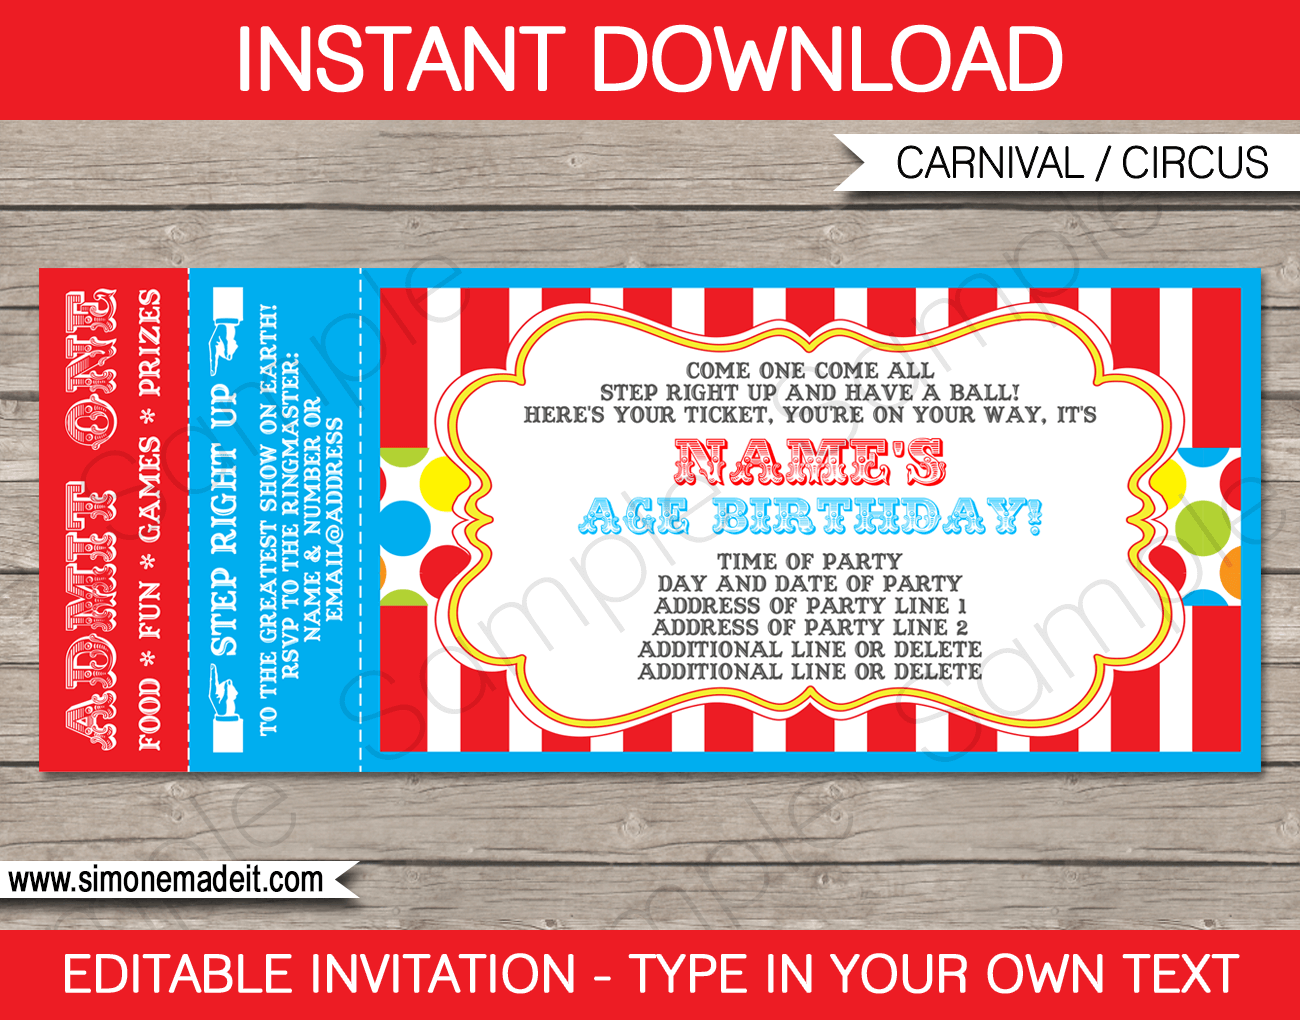 Carnival Ticket Invitation Template  Carnival or Circus Party